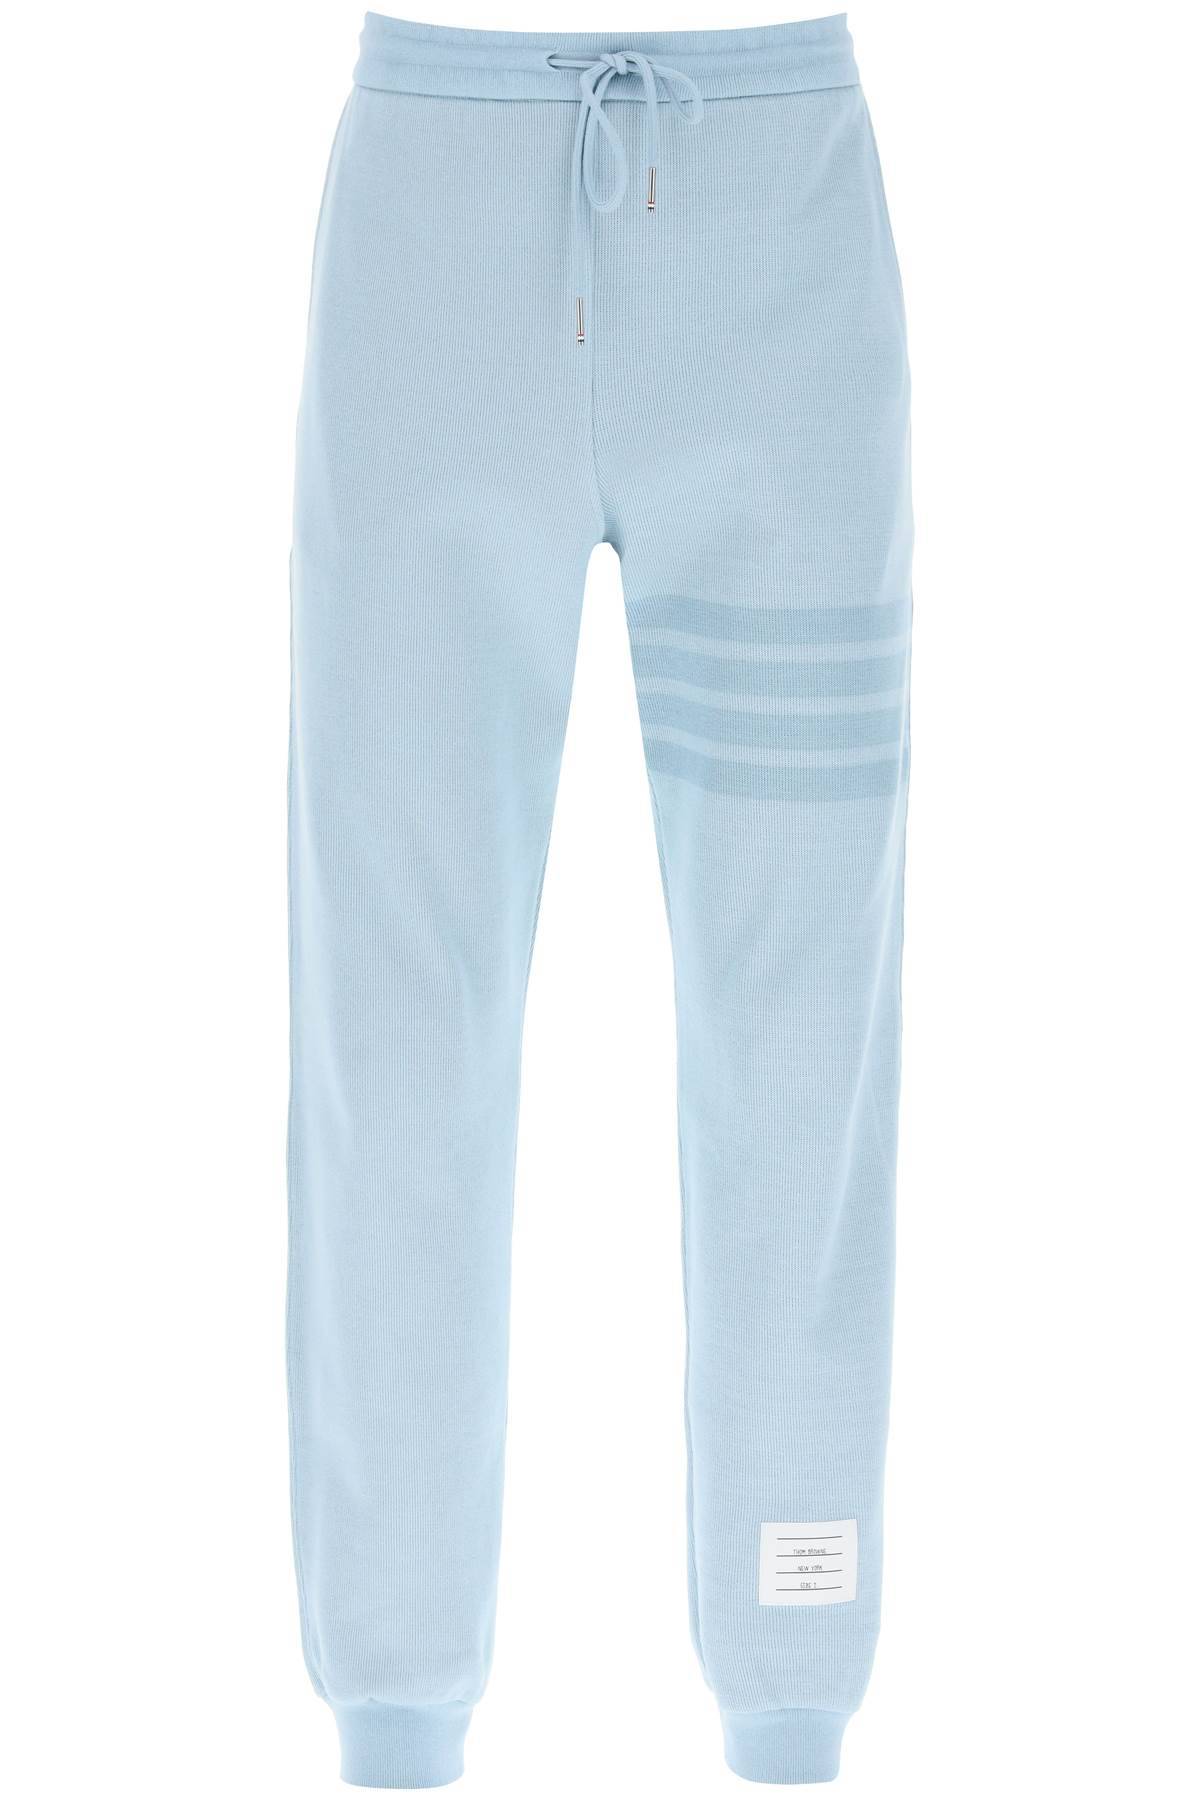 Thom Browne THOM BROWNE 4-bar joggers in cotton knit